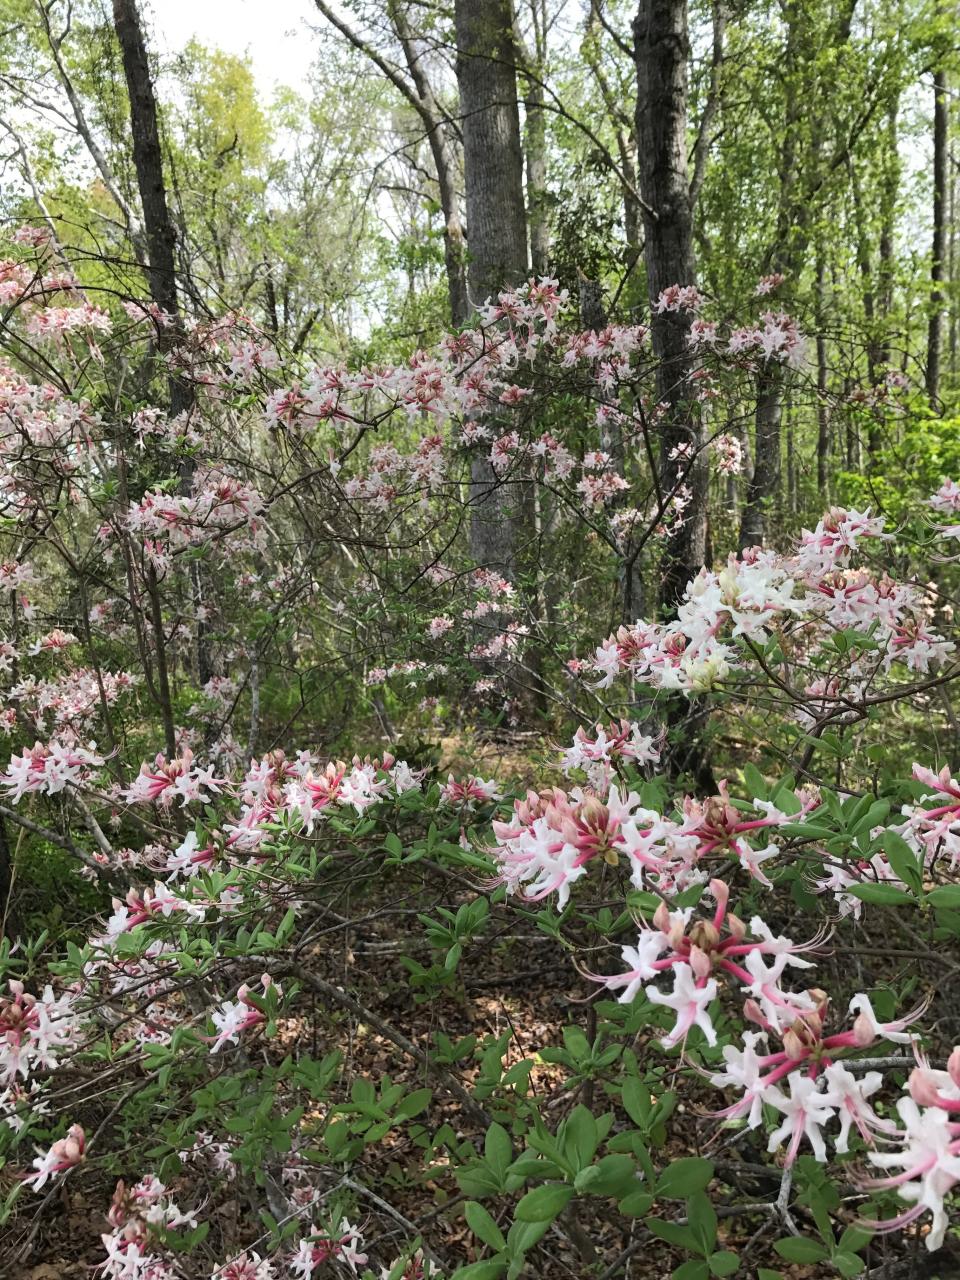 Native wild azaleas bloom during spring in some parts of the Southeast. White Springs, Florida, may be the only city in the U.S. to have hosted a wild azalea festival.